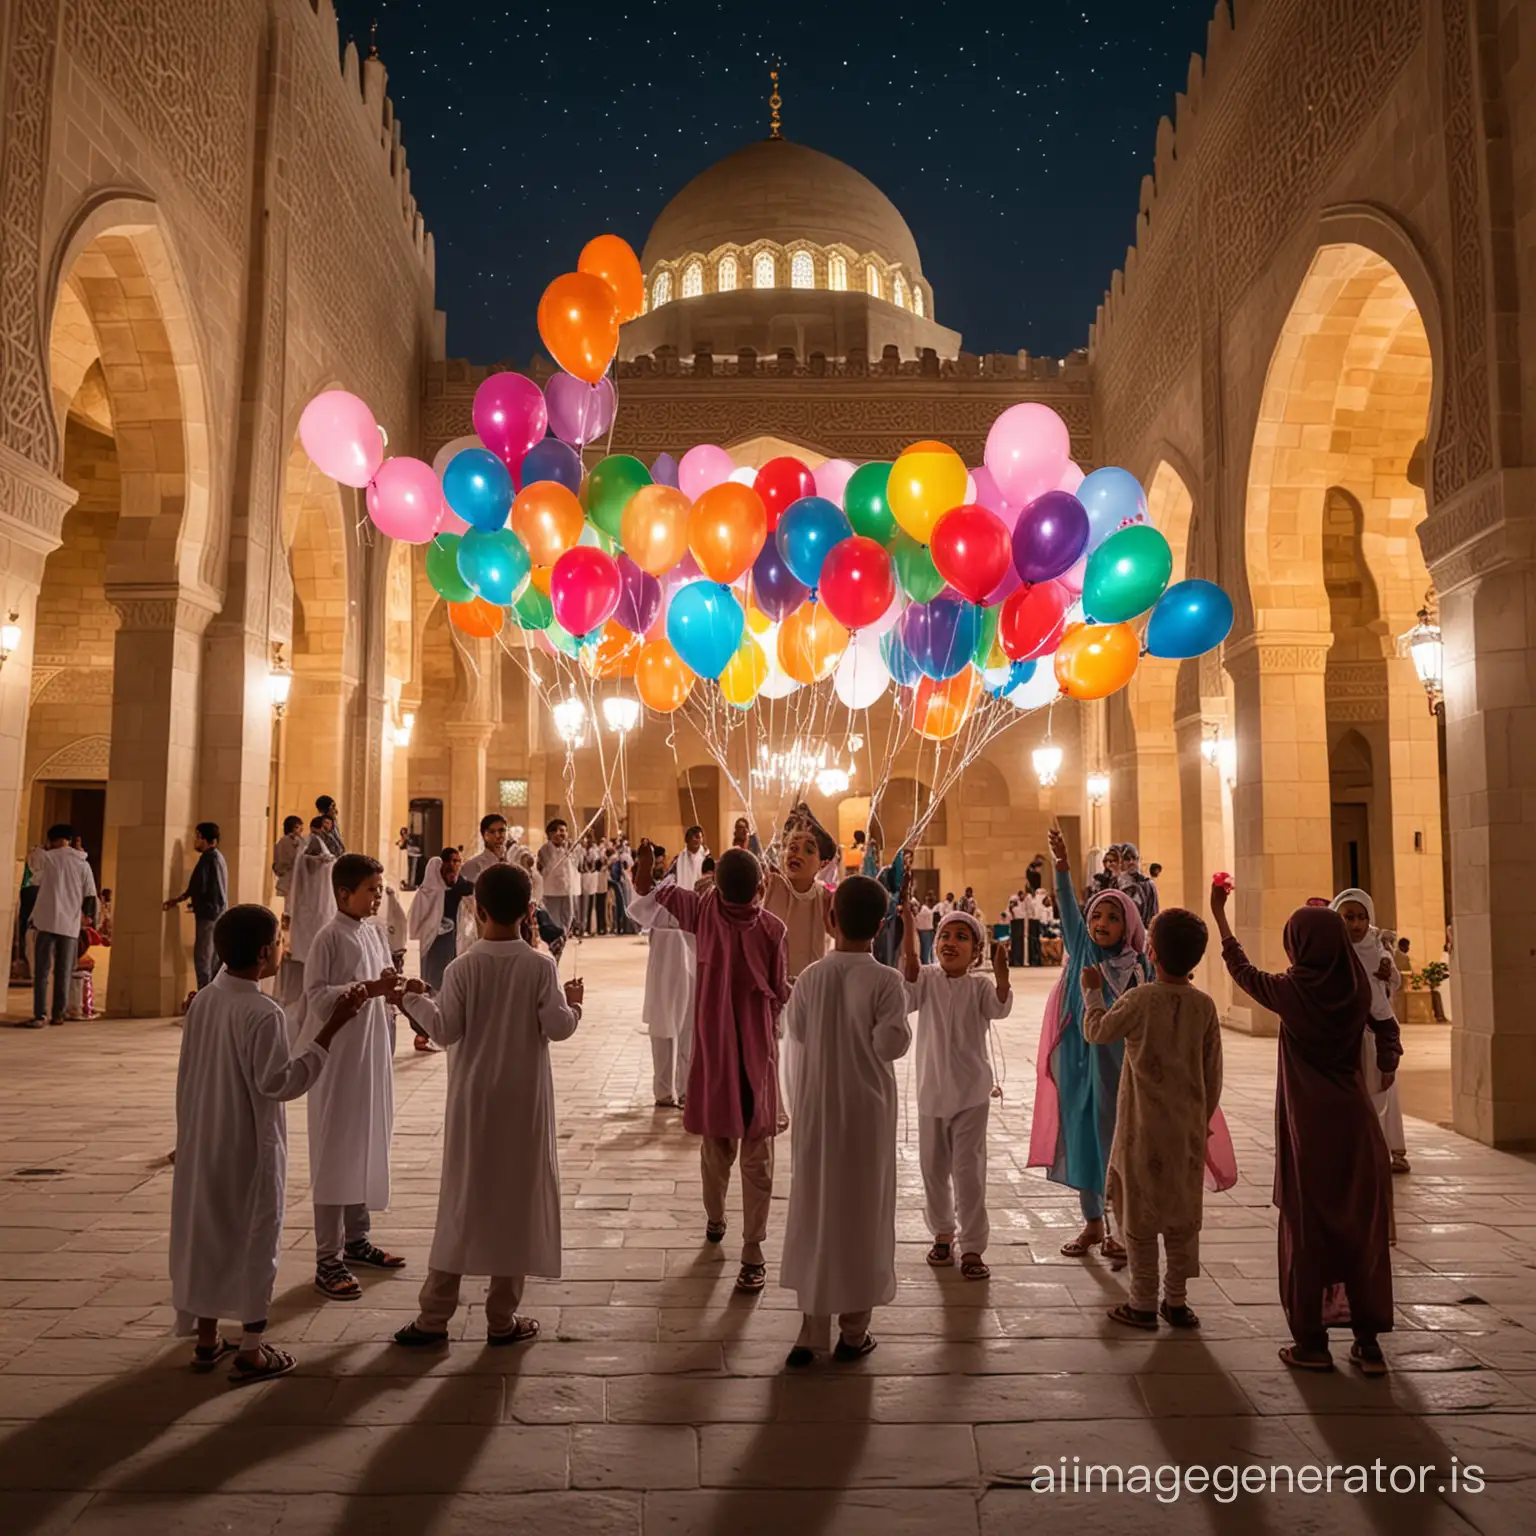 Joyful-Arab-Children-Celebrating-Eid-ul-Fitr-with-Balloons-and-Candy-in-Mosque-Courtyard-at-Night